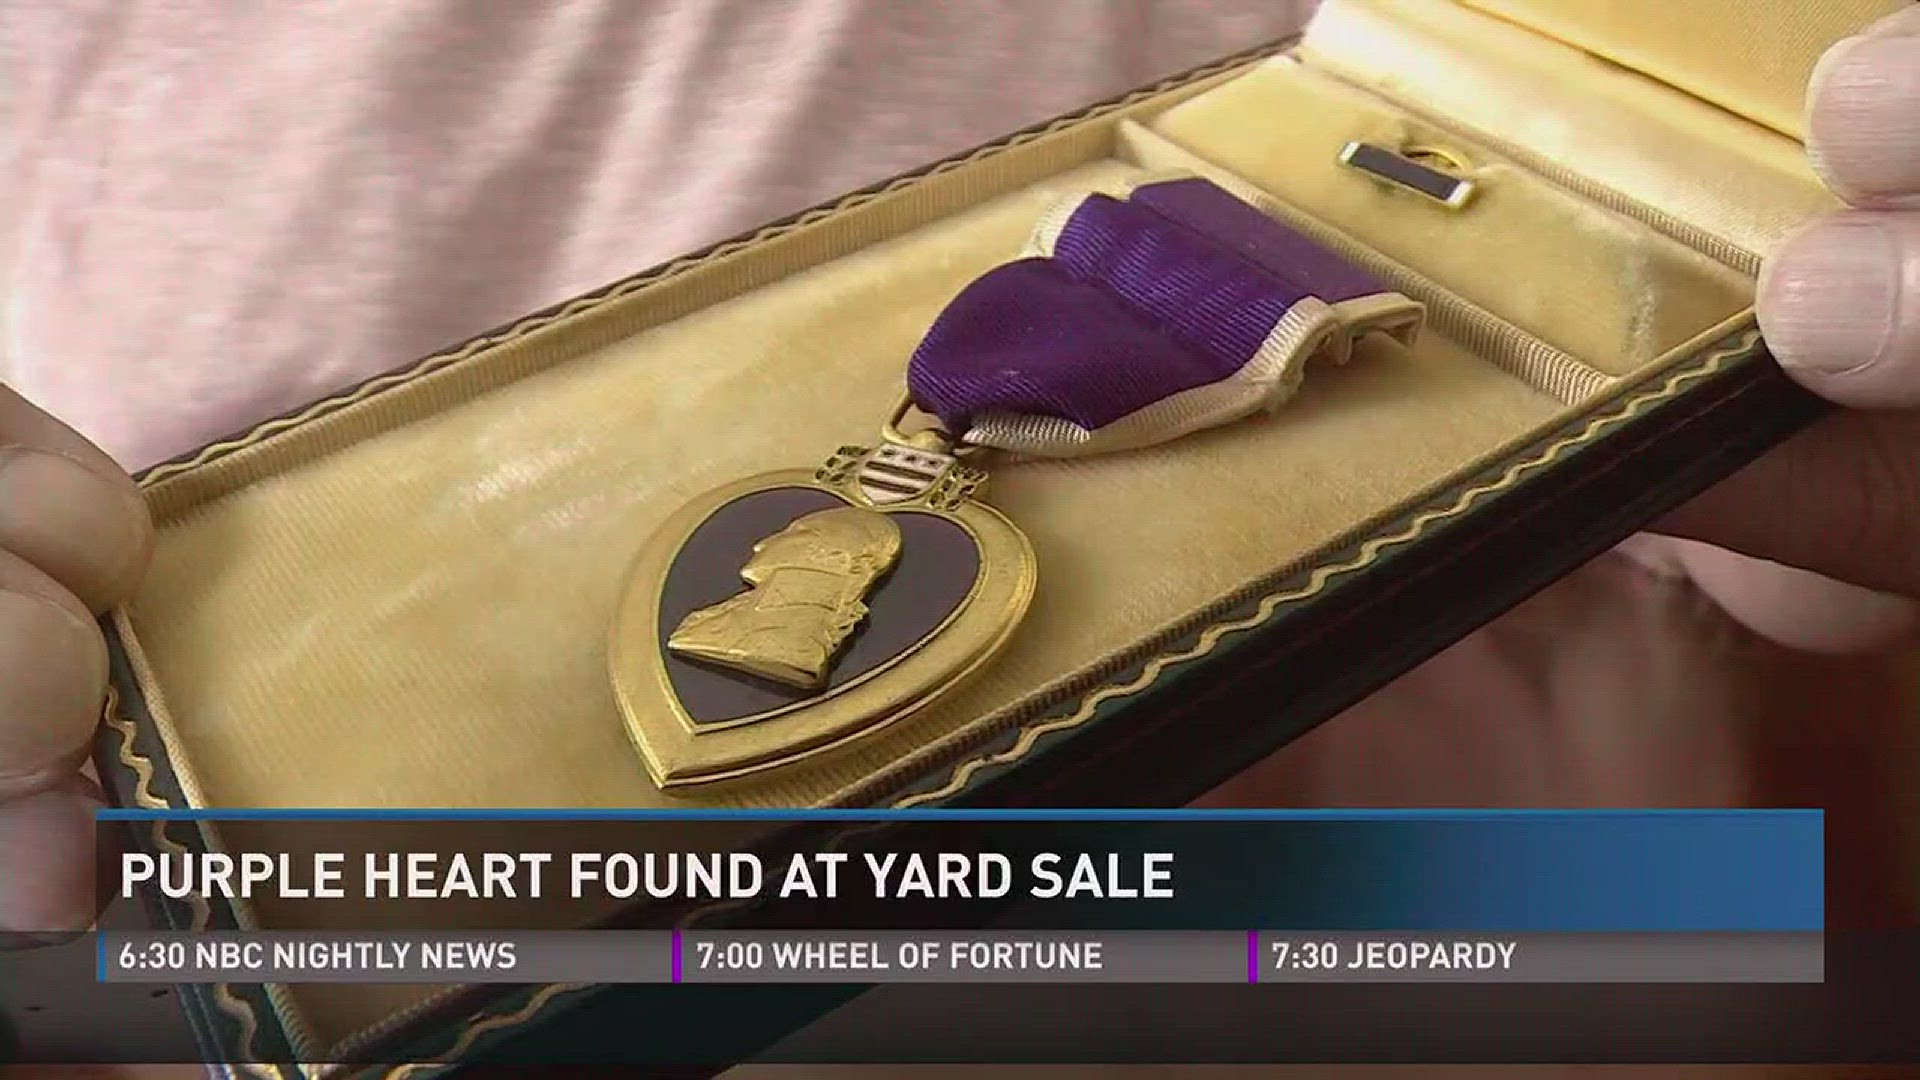 Aug. 8, 2017: A Vietnam Veteran found a Purple Heart at a yard sale, and has been searching for the medal's owner for the past two years.